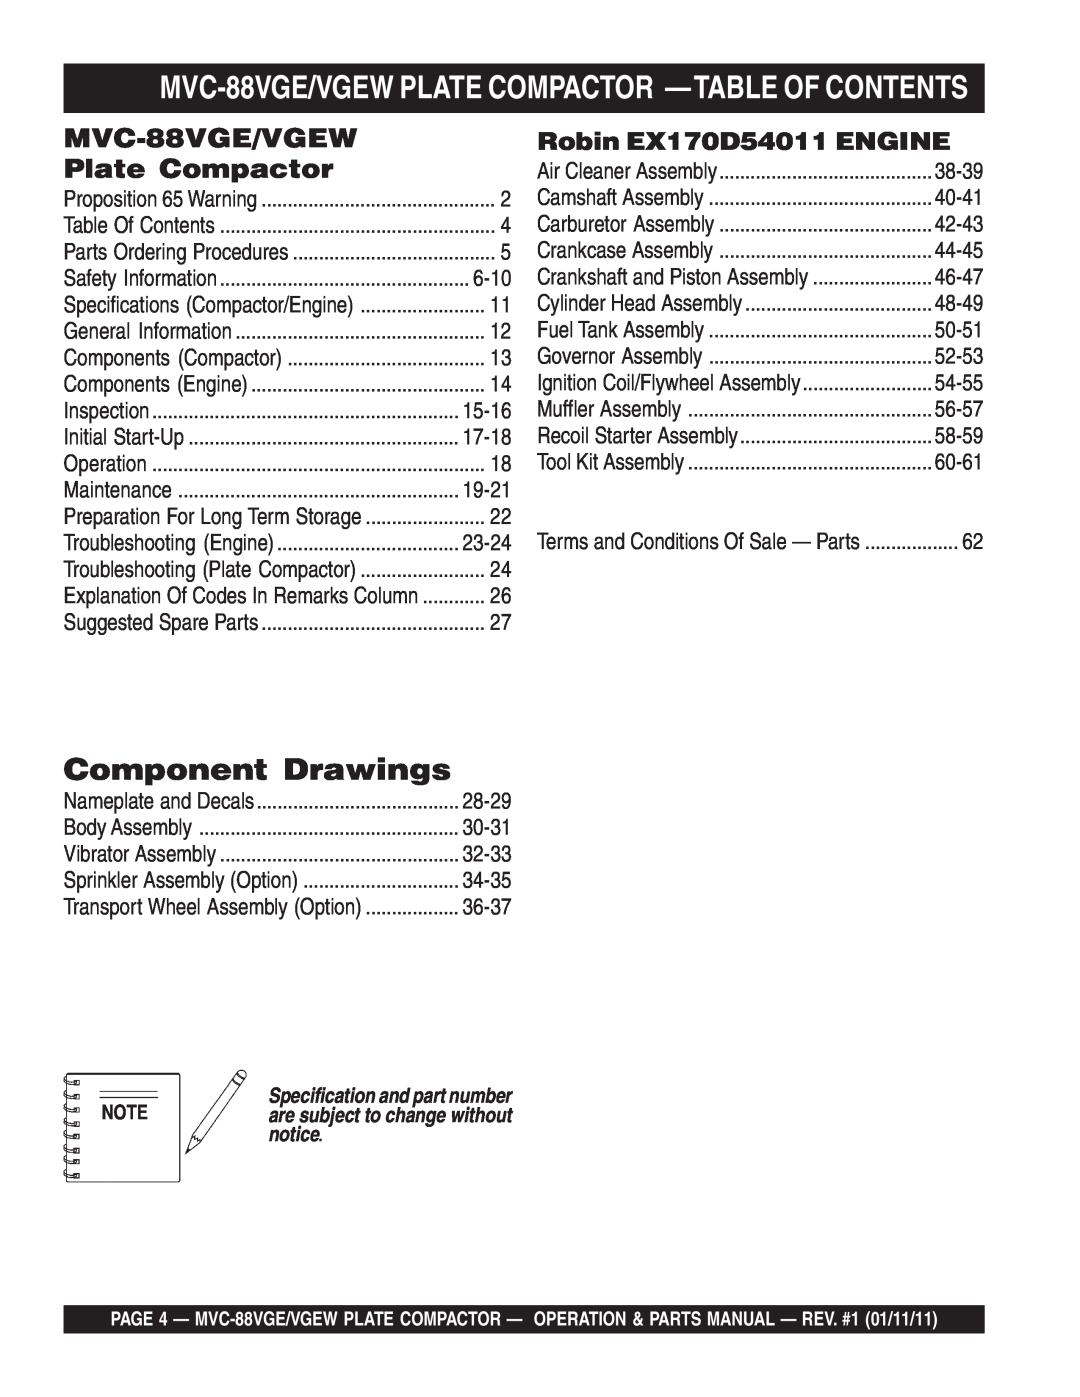 Multiquip manual MVC-88VGE/VGEW PLATE COMPACTOR -TABLE OF CONTENTS, Robin EX170D54011 ENGINE, Component Drawings, 6-10 